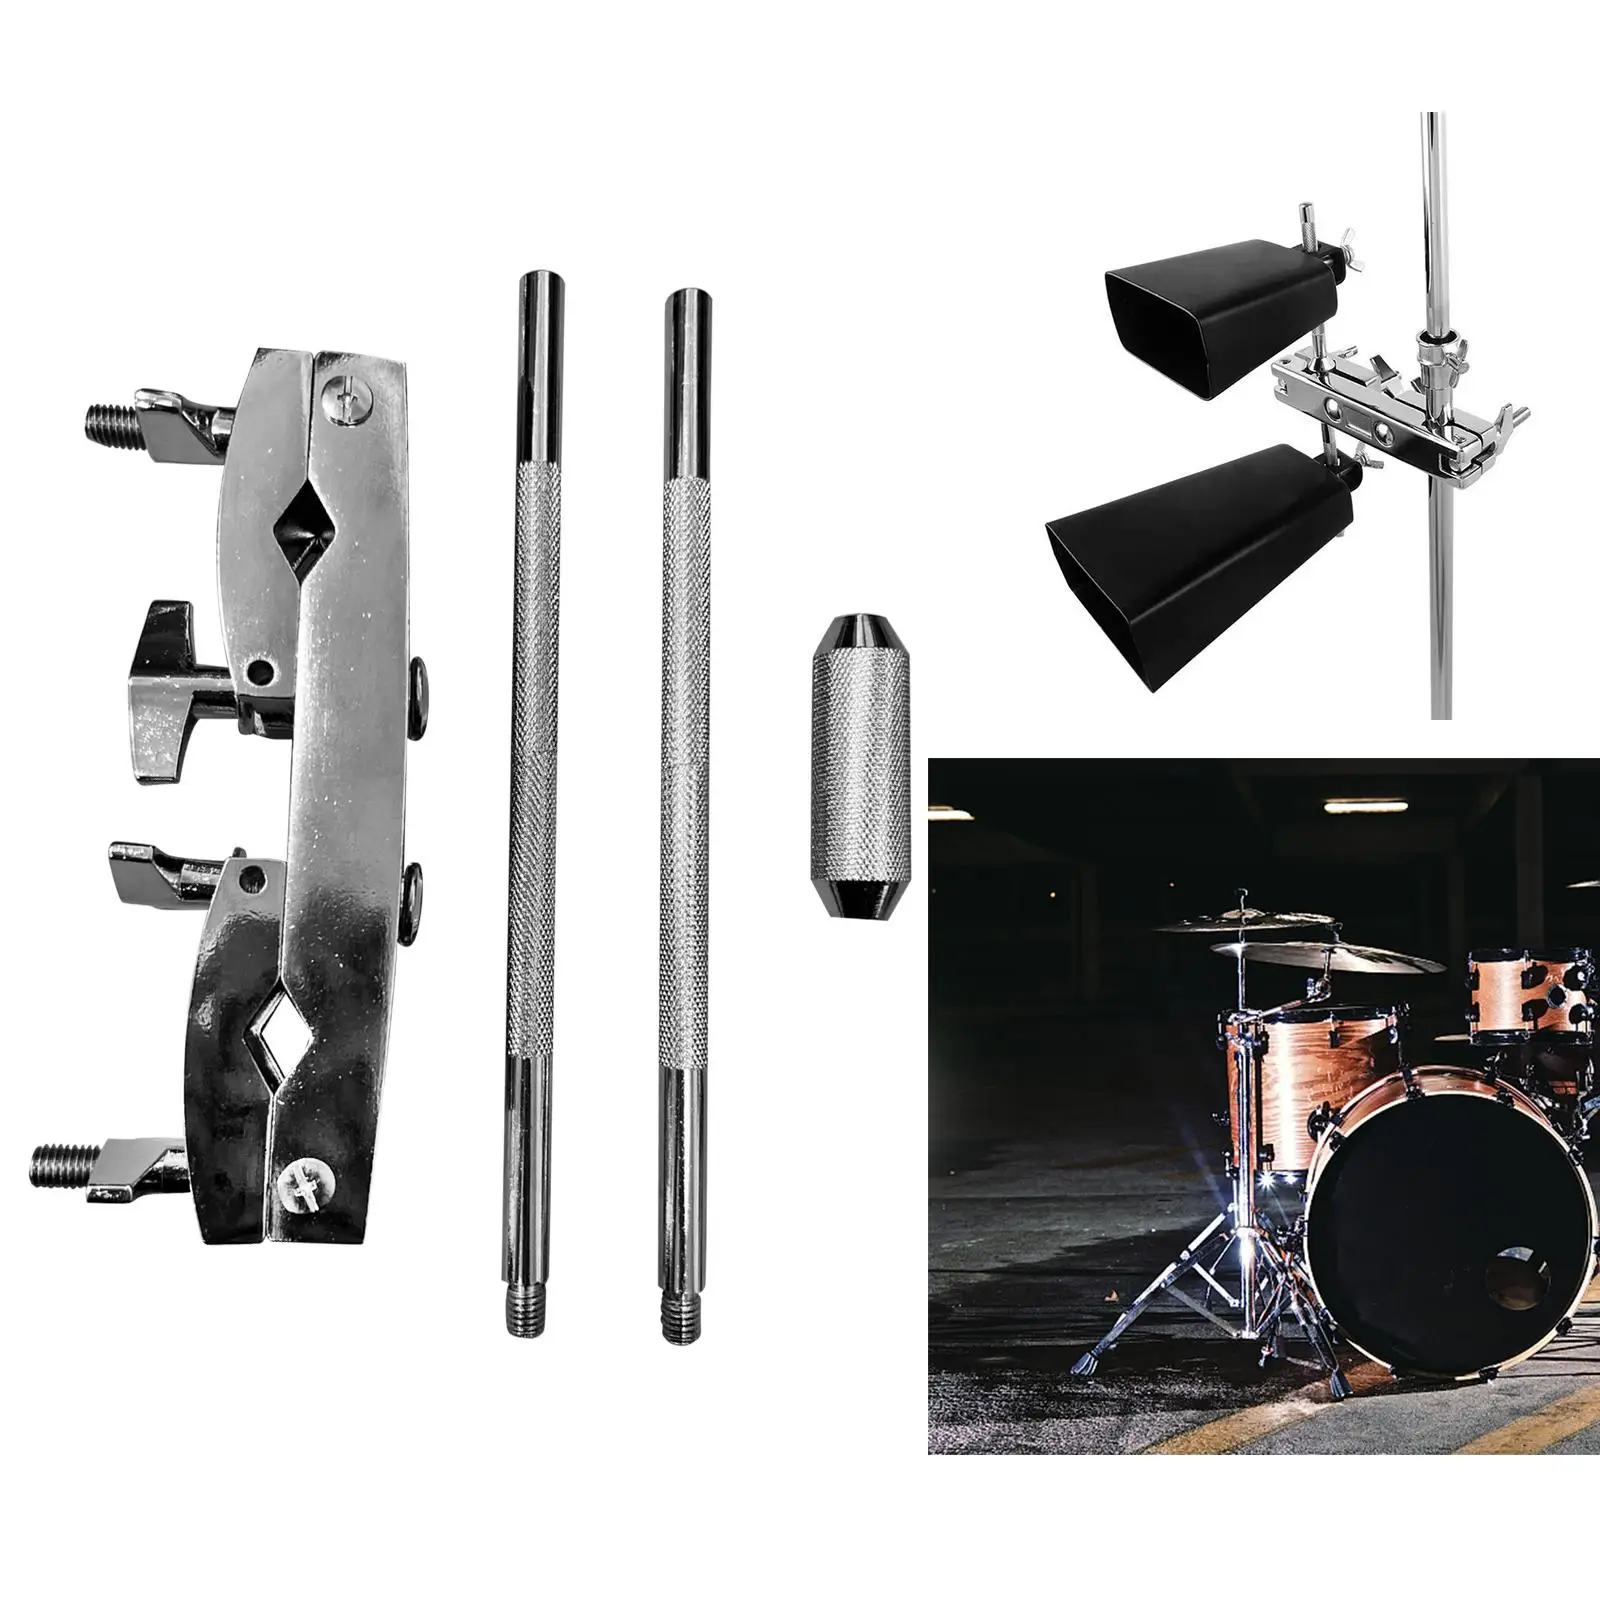 

Drum Cowbell Mounting Percussion Bracket Metal Connecting Clamp Holder Bracket Rod for Cymbals Drums Accessories Musical Parts